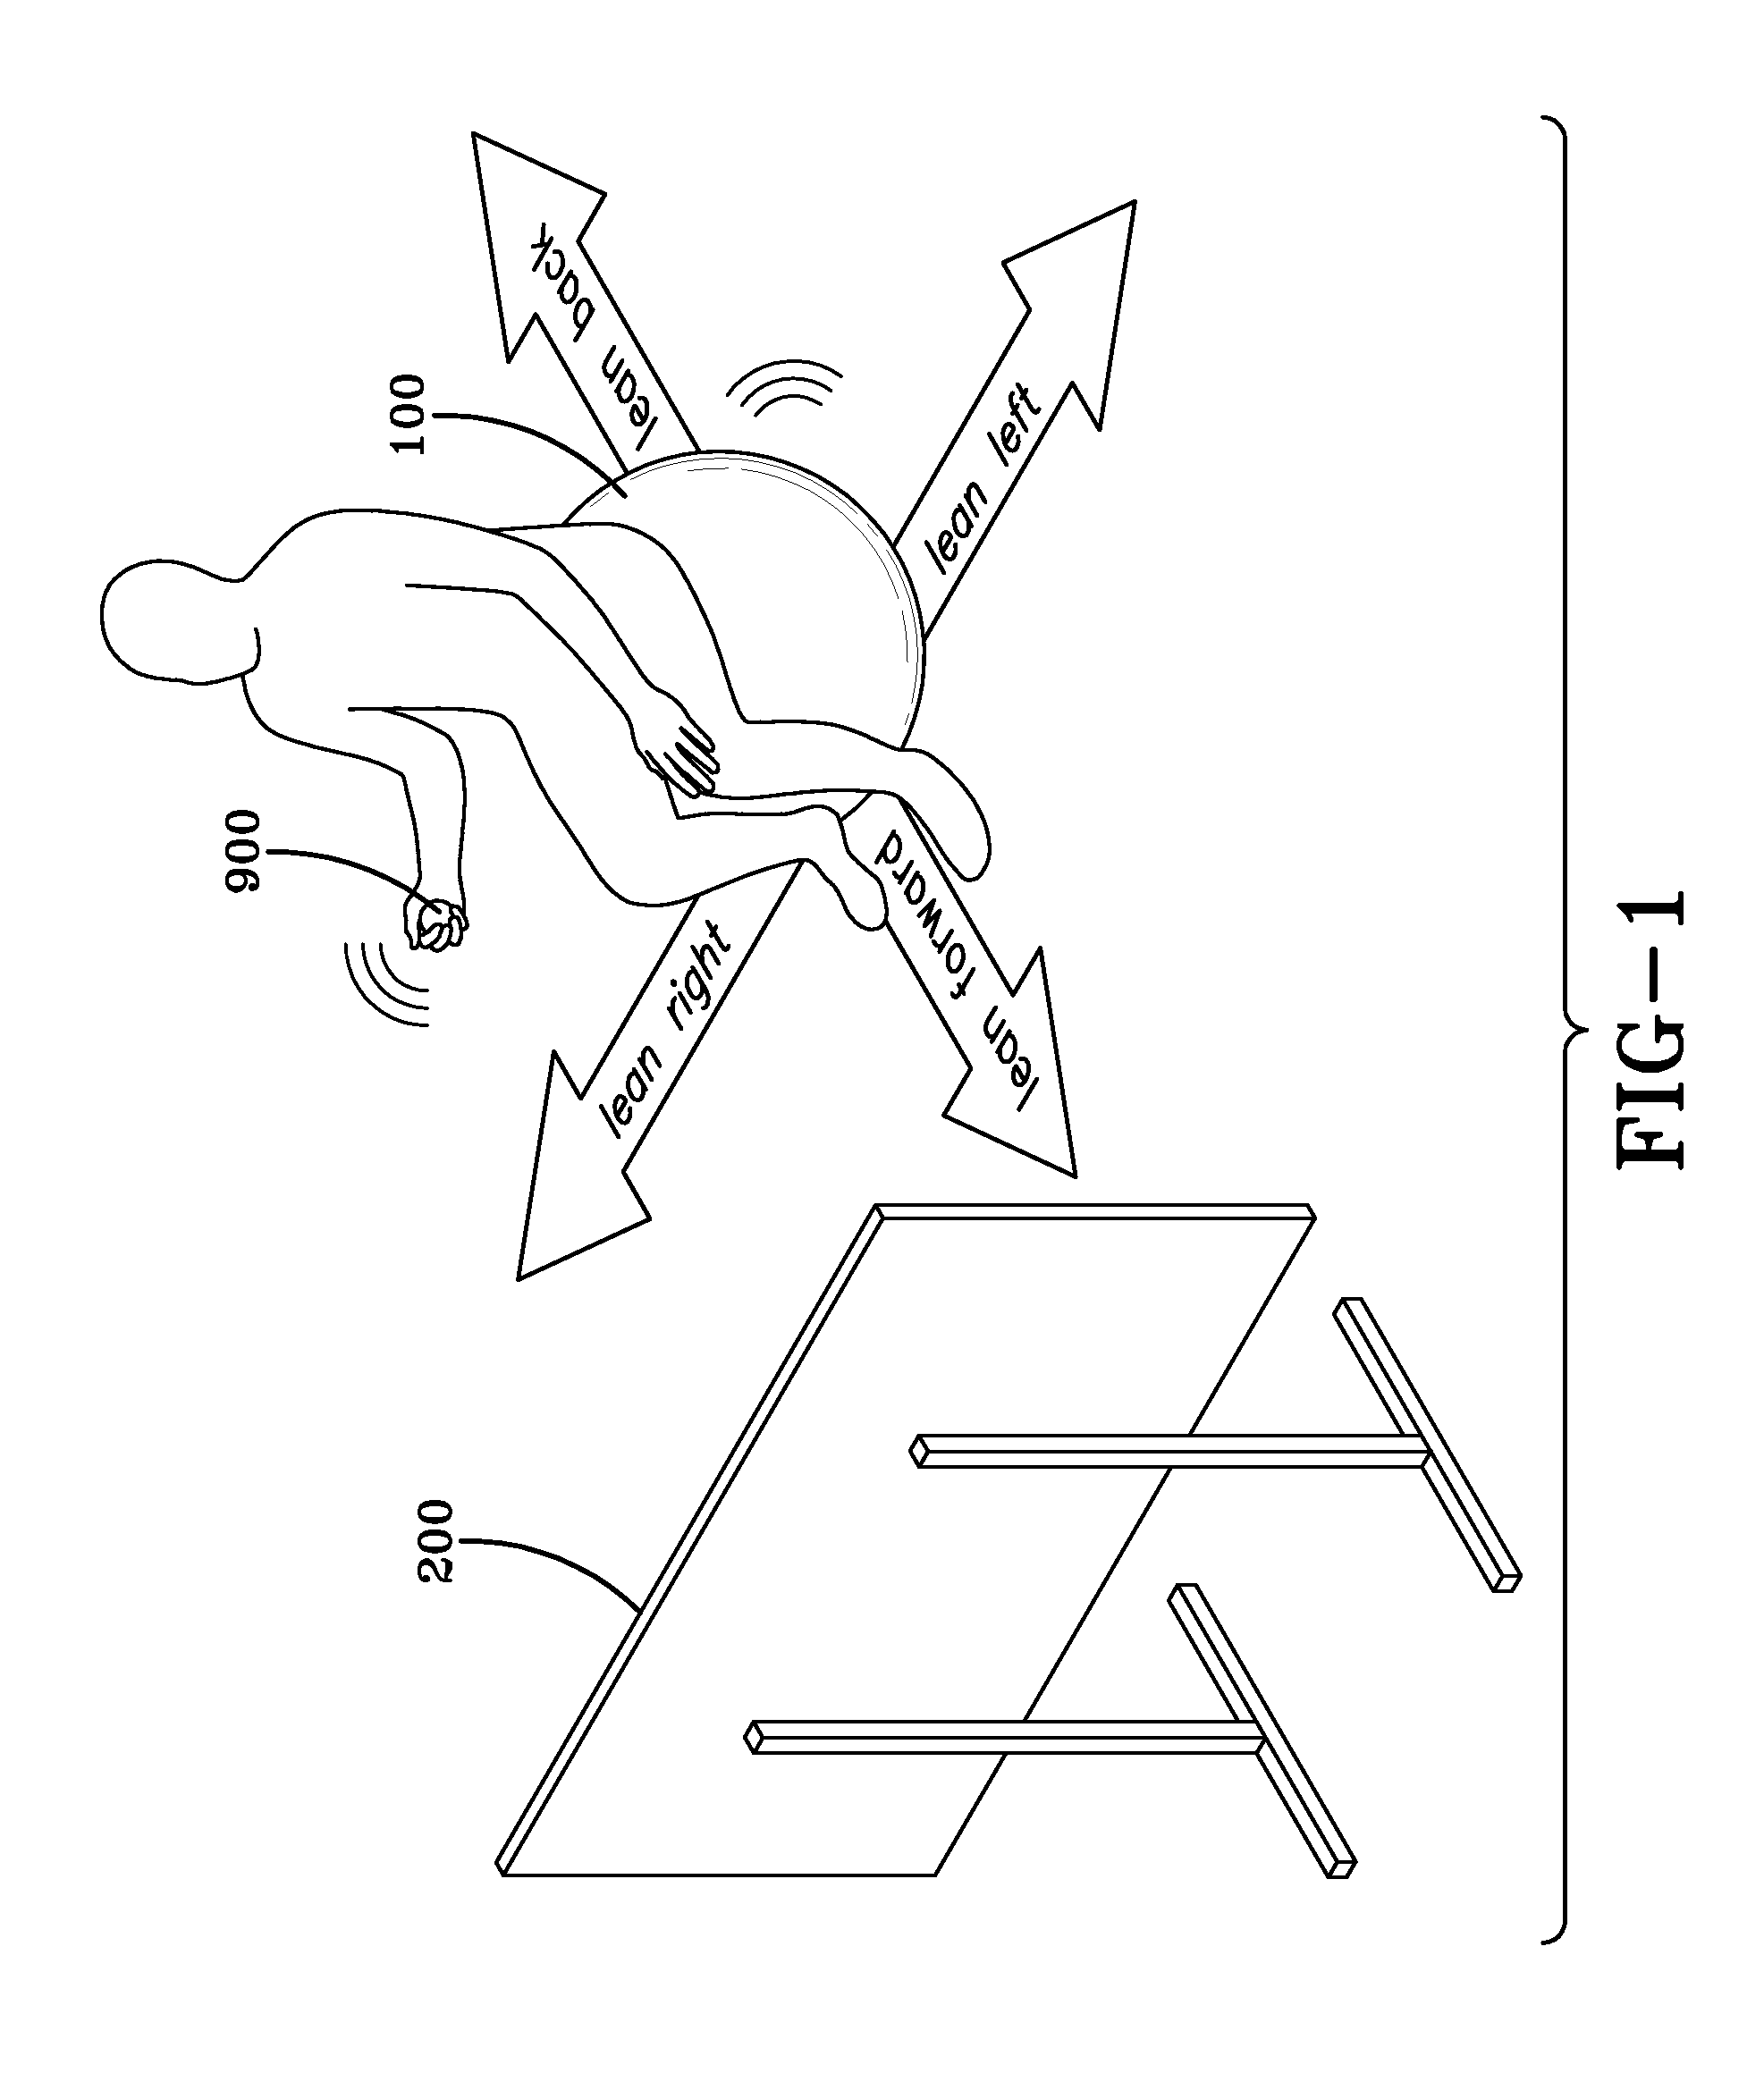 Yoga ball game controller system and method